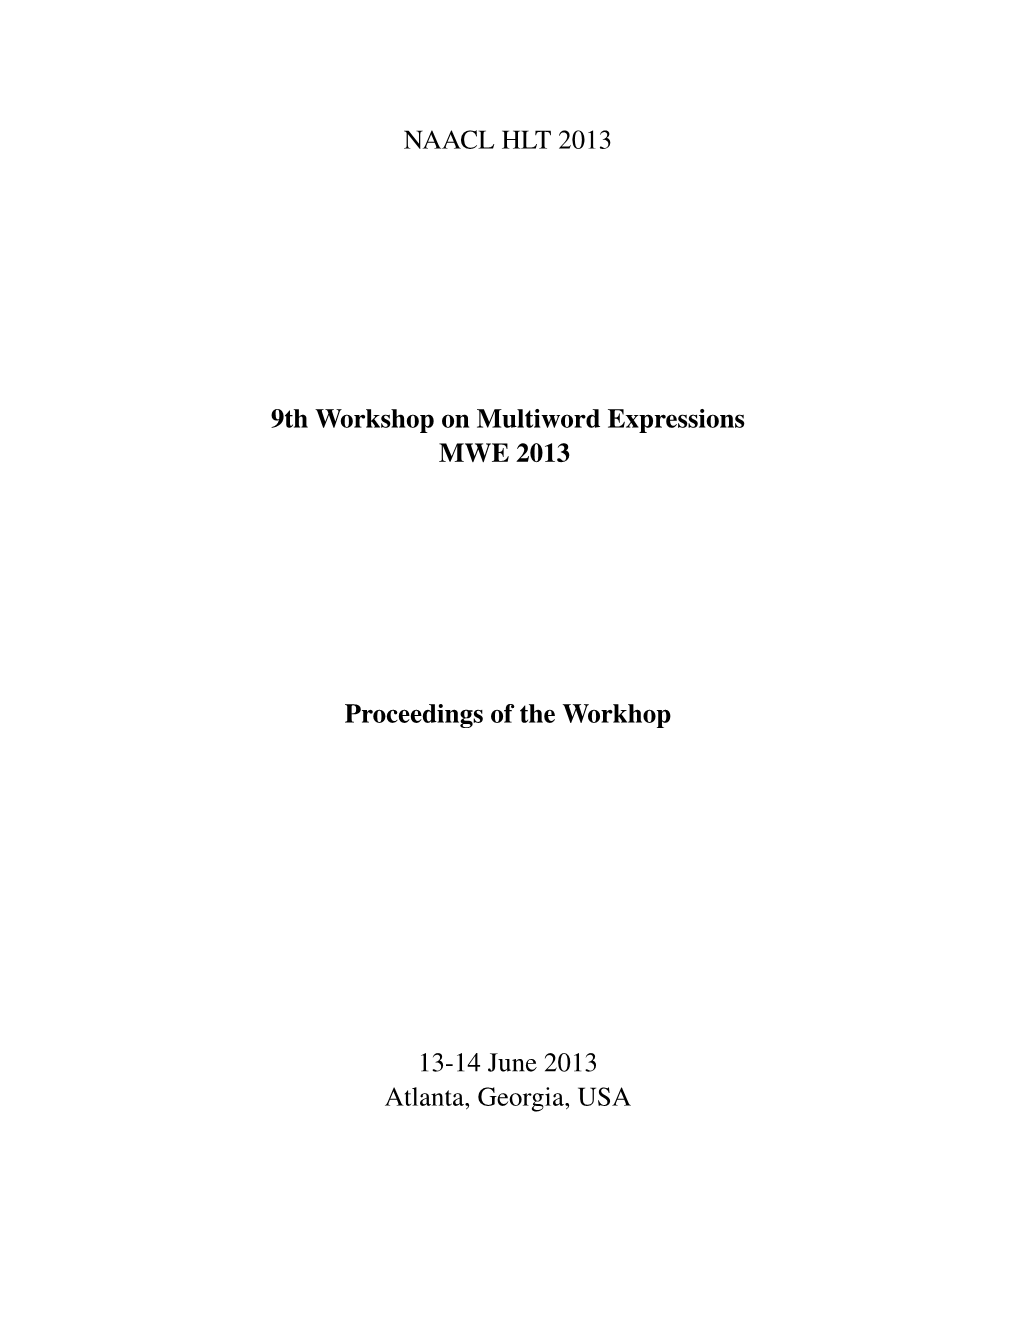 Proceedings of the 9Th Workshop on Multiword Expressions (MWE 2013), Pages 1–10, Atlanta, Georgia, 13-14 June 2013